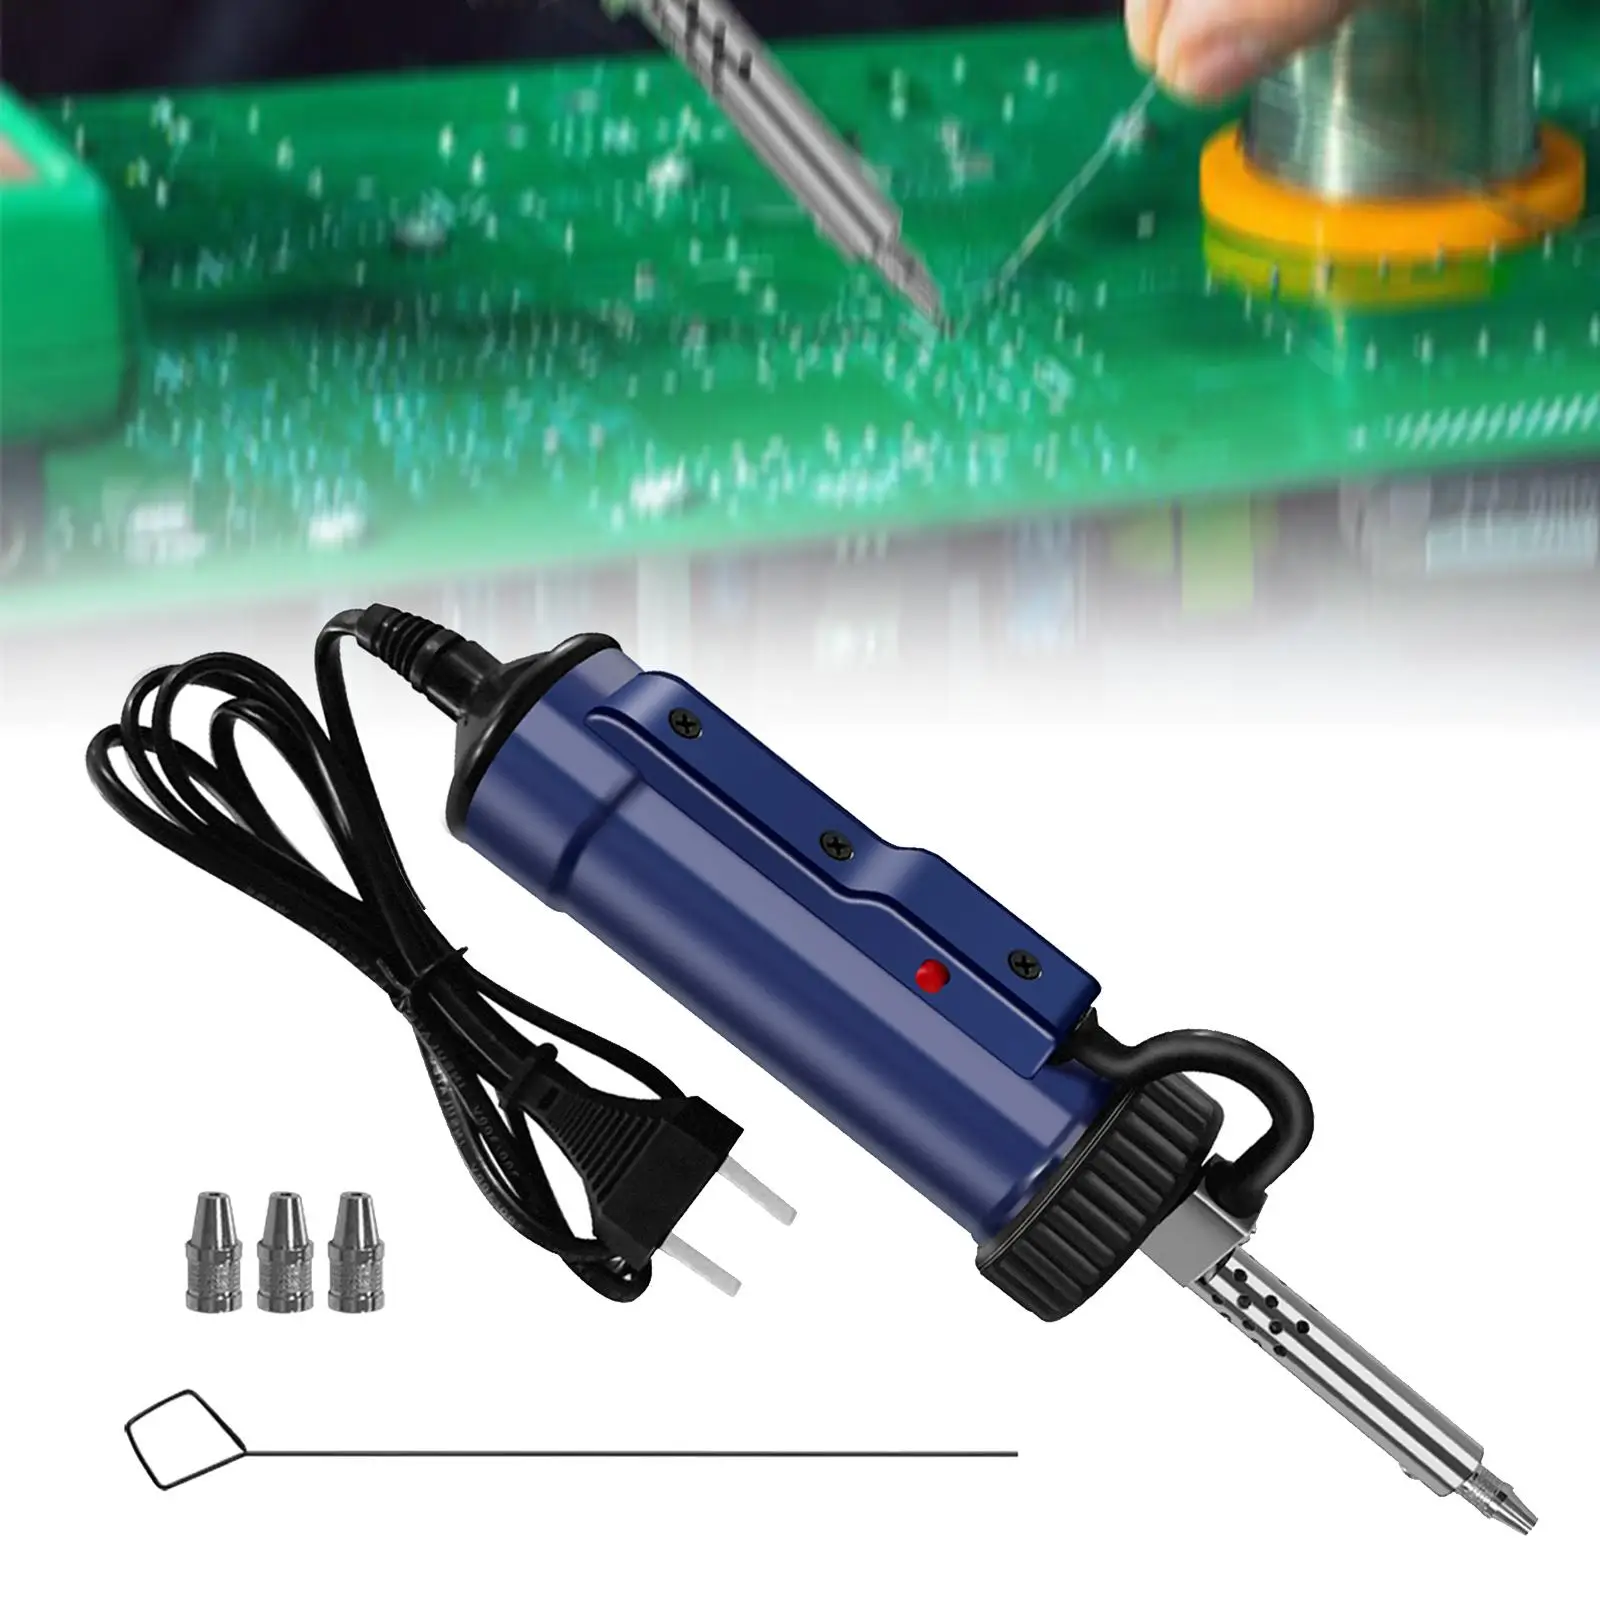 Electric Desoldering Pump US Adapter DIY with 3 Suction Tips Solder suckers for Circuit Board Industry Jewelry Appliance Repair